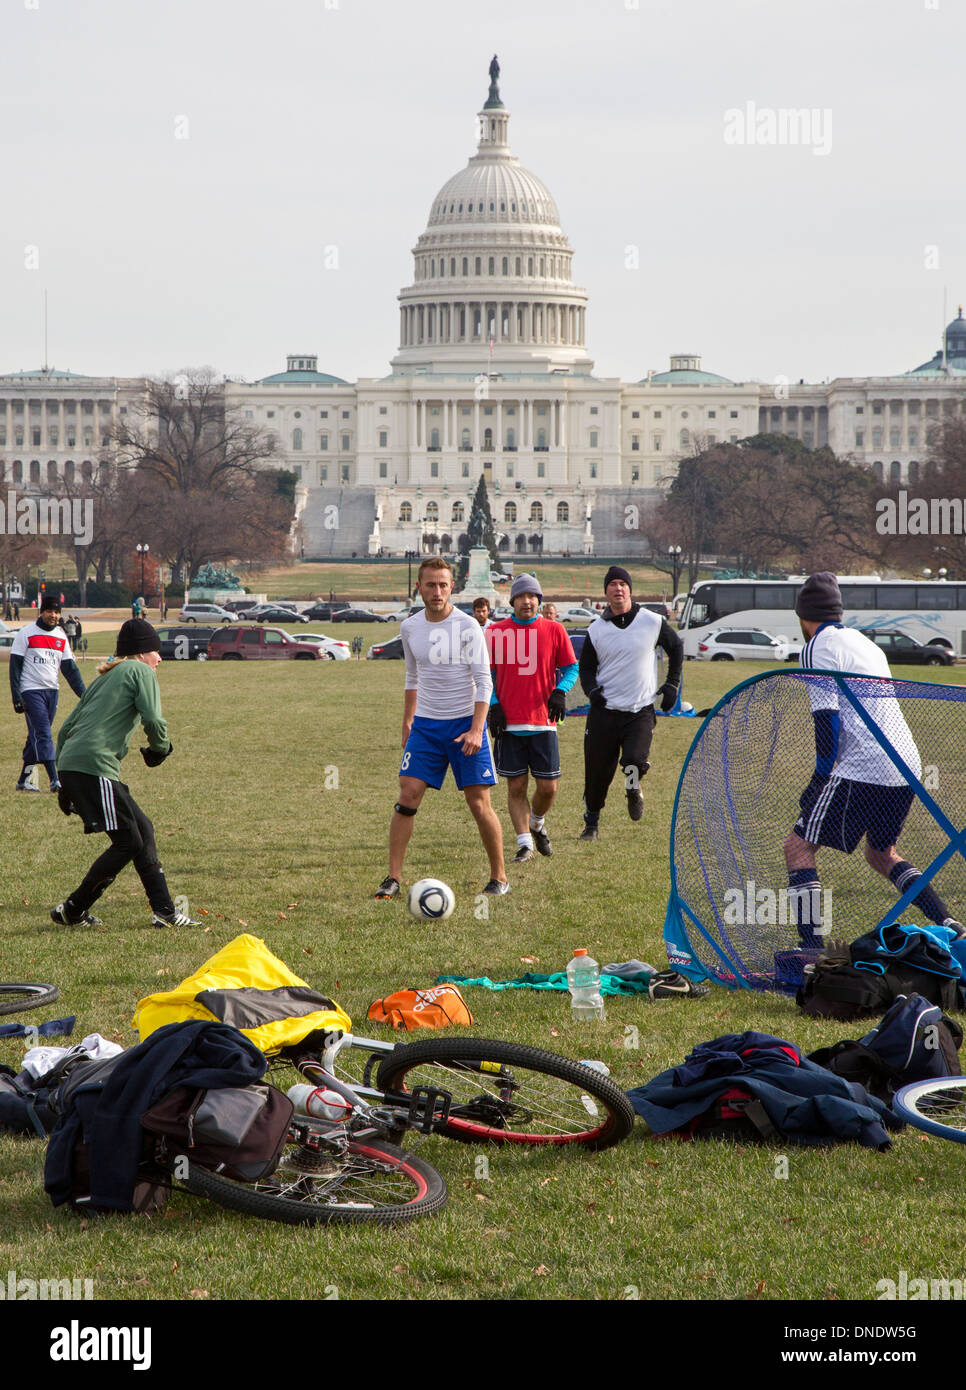 Washington, DC - Men play an informal soccer game on the National Mall near the U.S. Capitol. Stock Photo